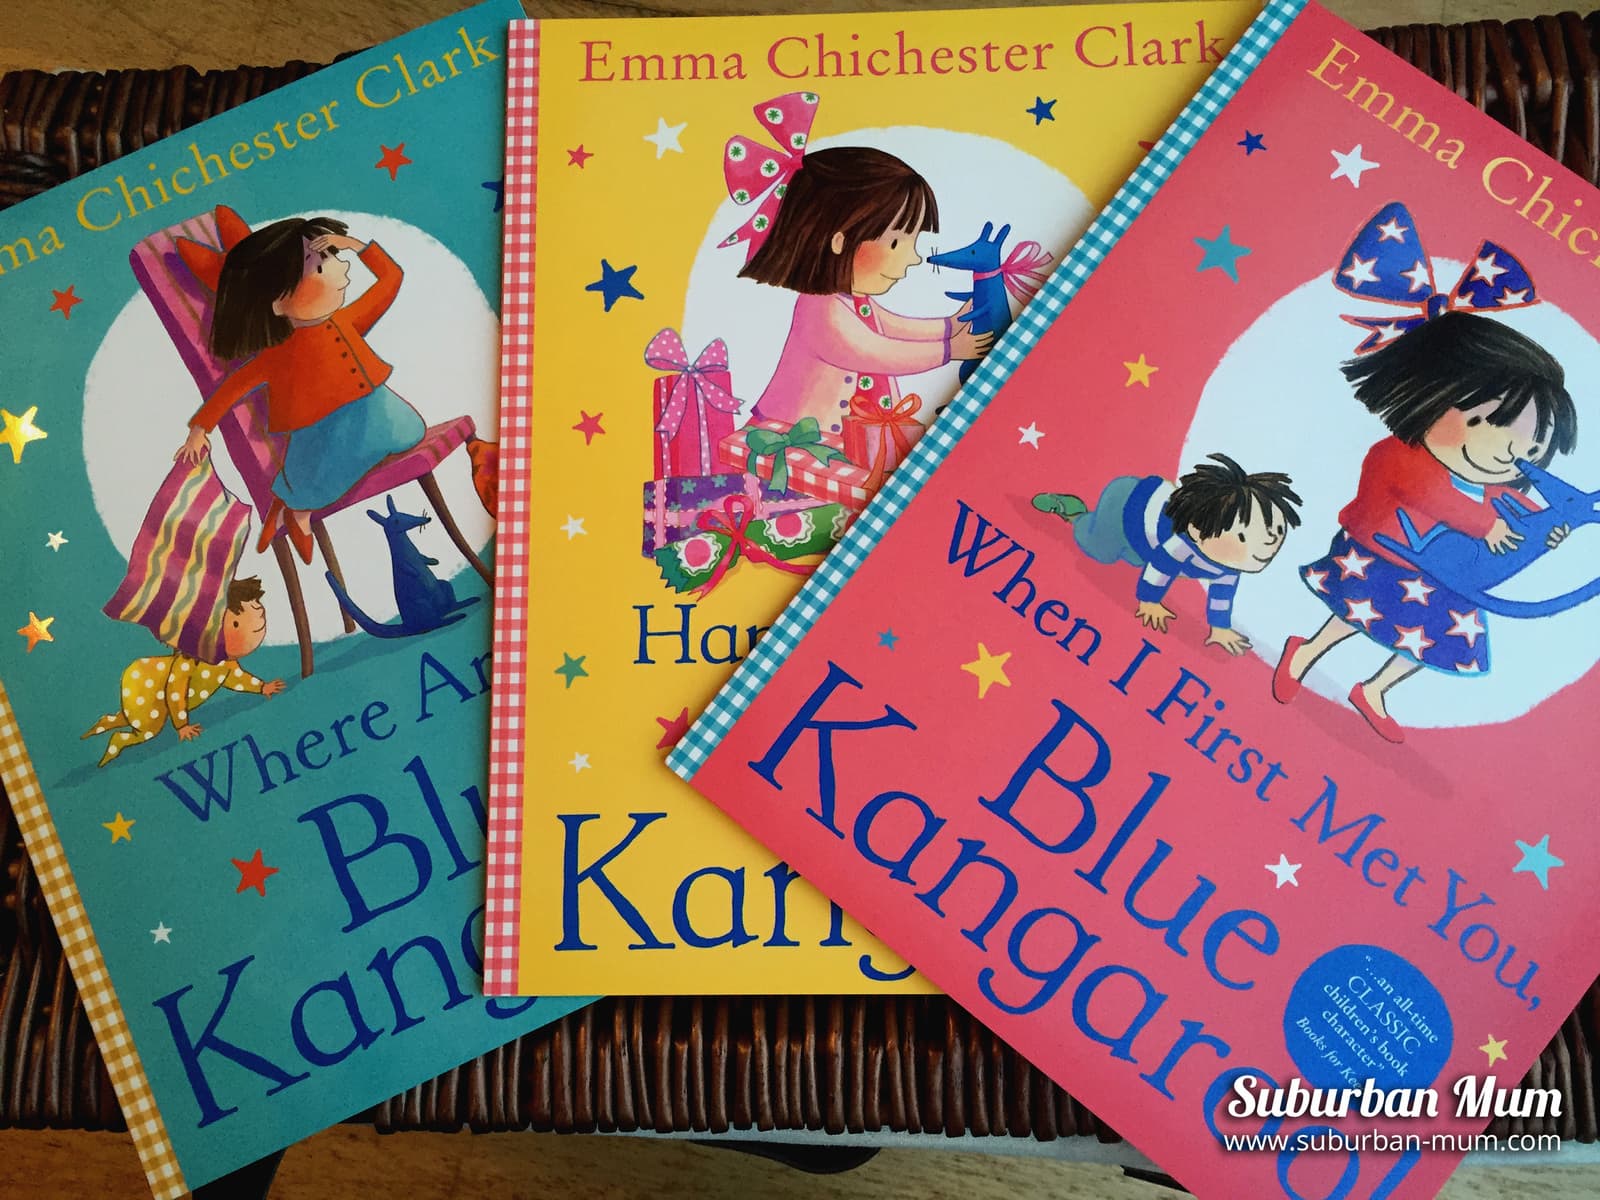 The Blue Kangaroo series by Emma Chichester Clark